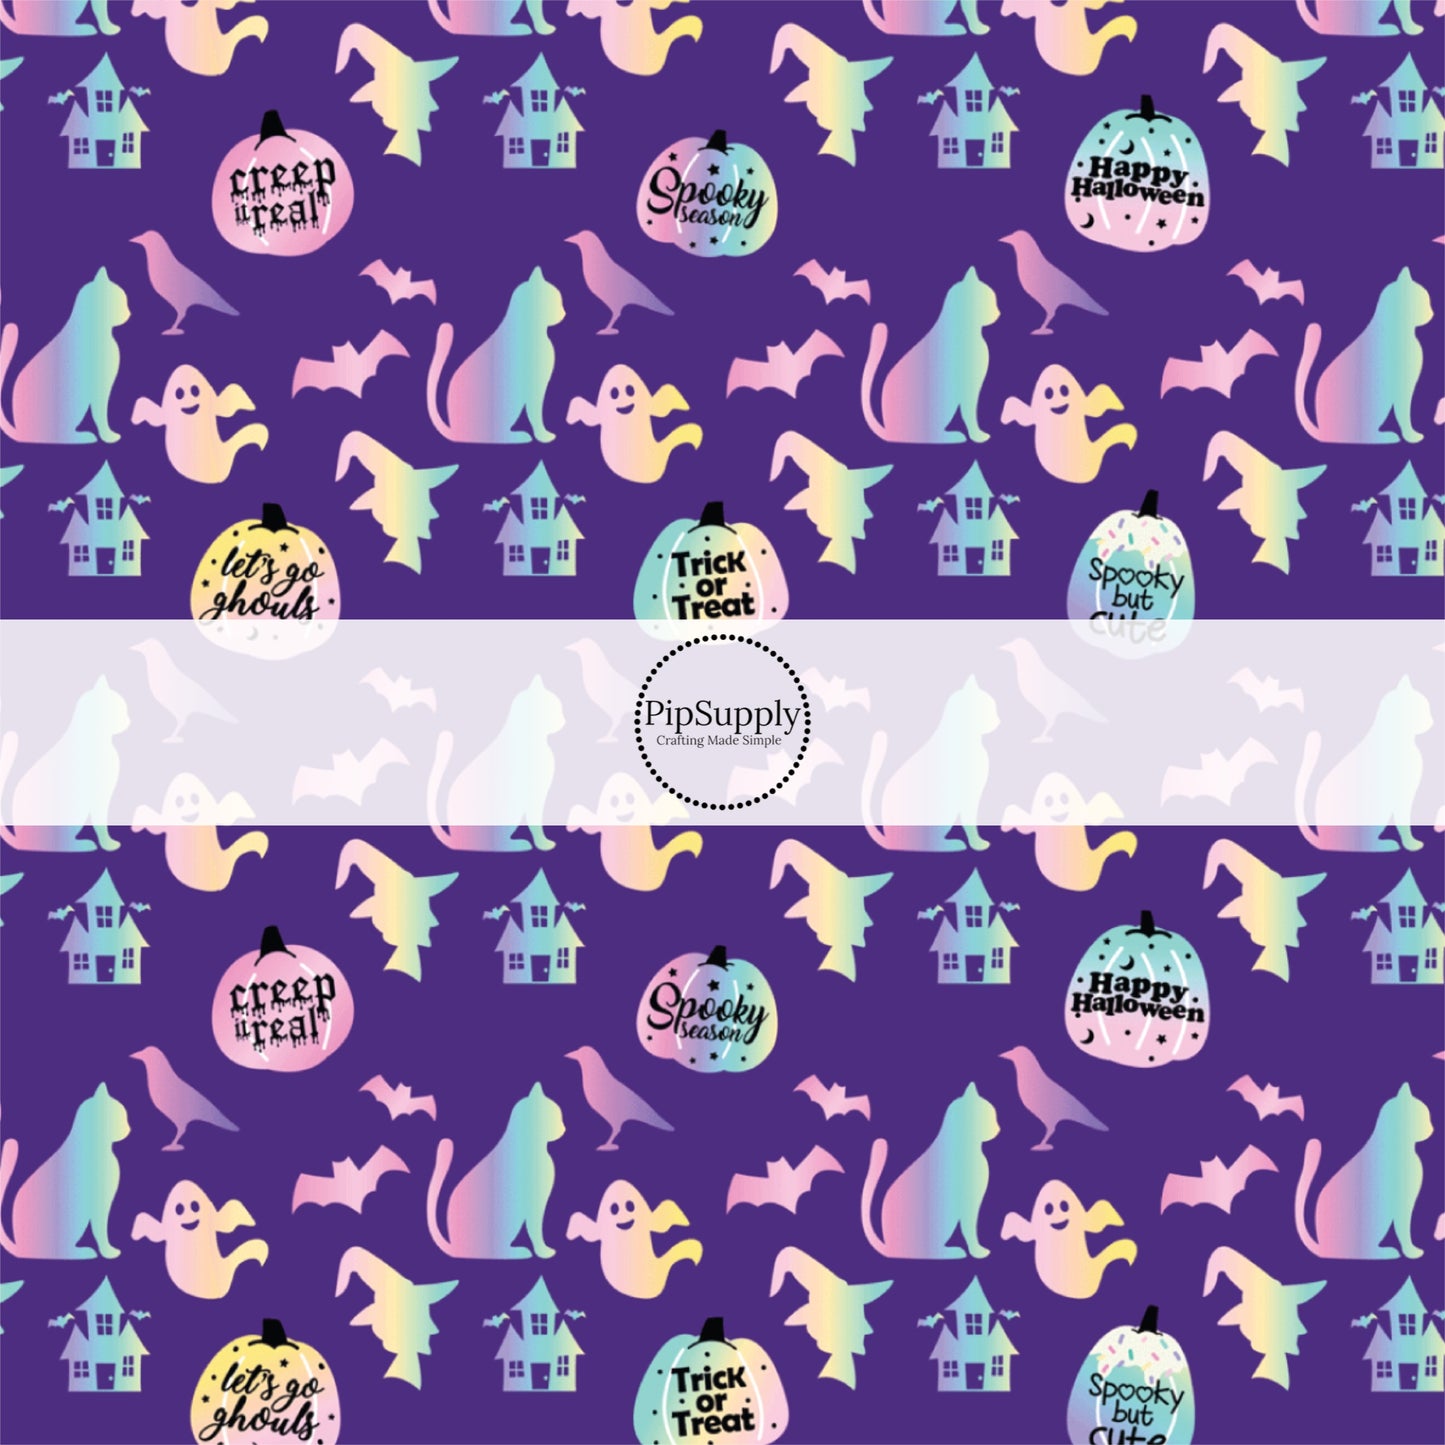 Purple fabric by the yard that features spooky silhouettes, pumpkins, and popular Halloween phrases.